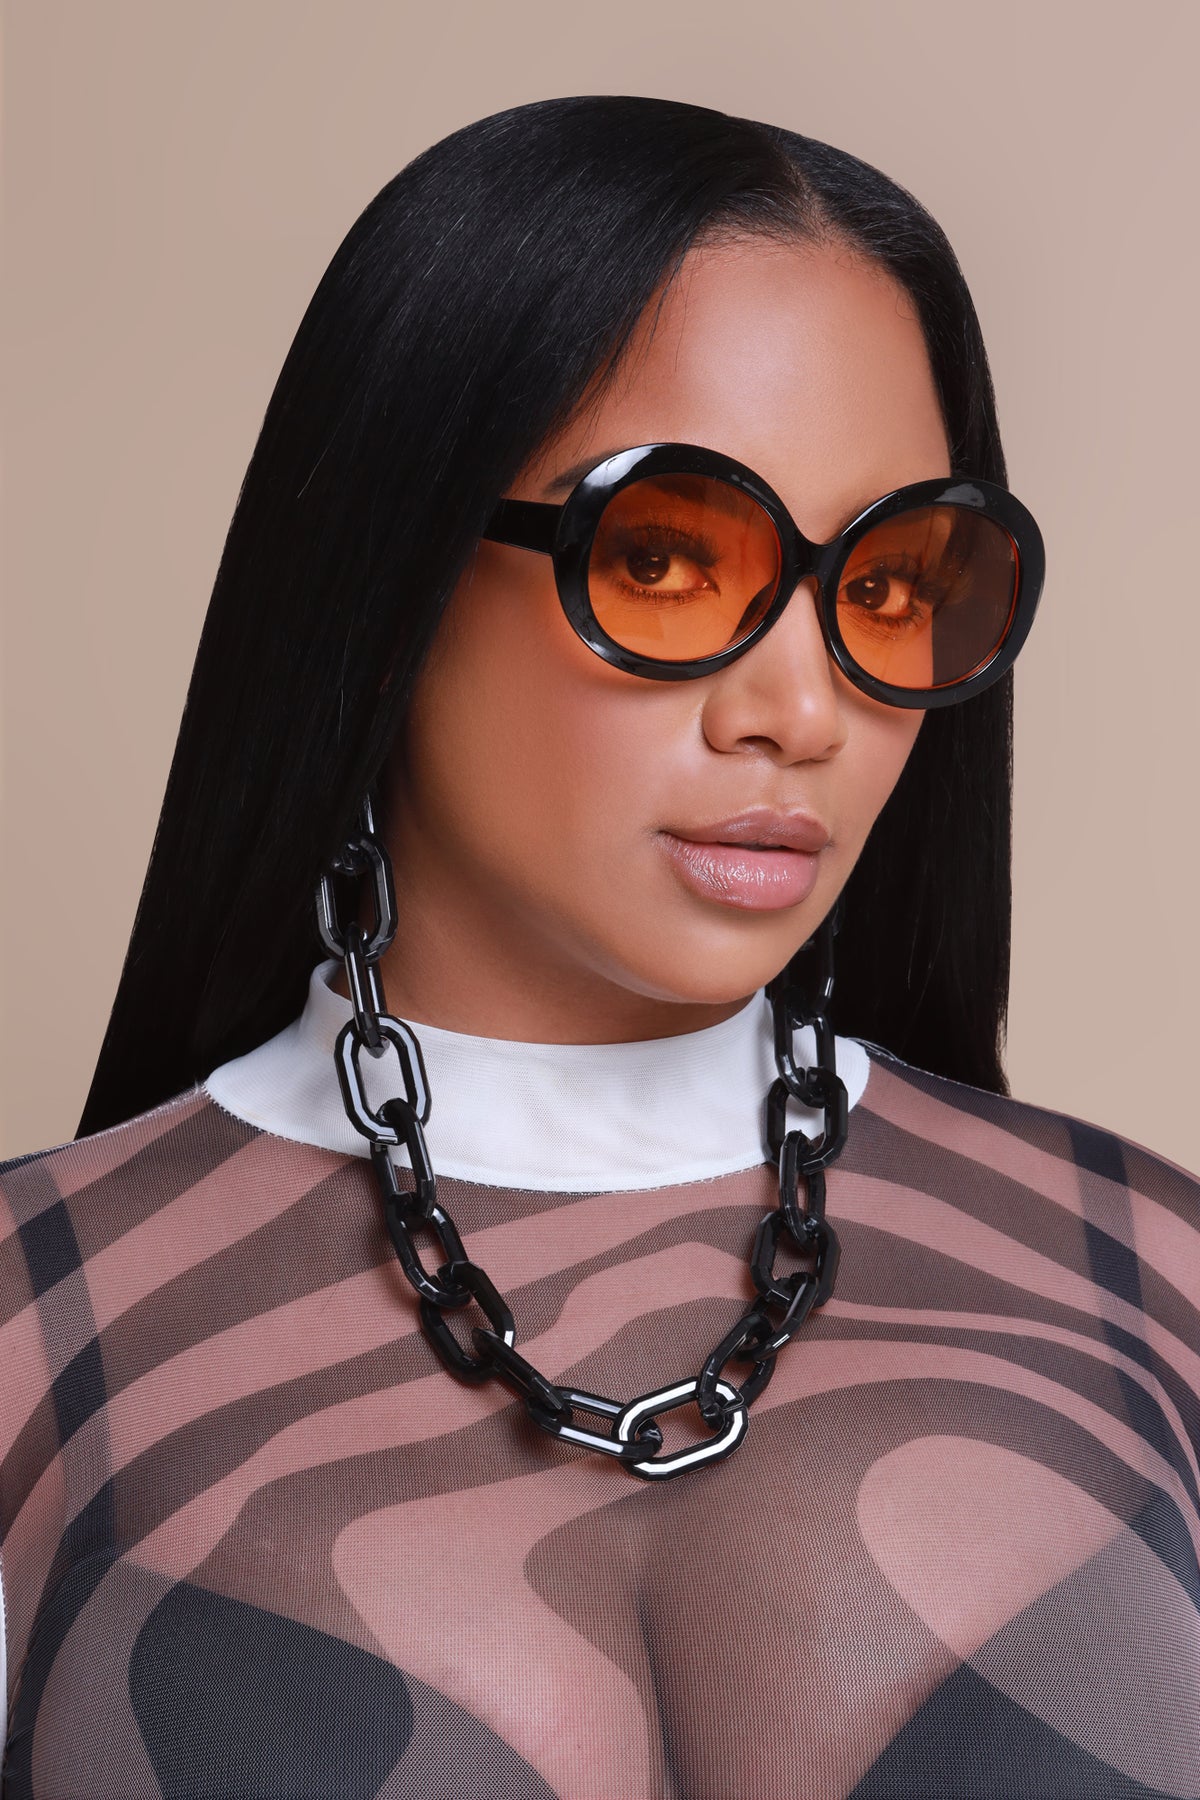 
              Sneaky Link Rounded Chainlink Sunglasses - Black/Copper - Swank A Posh
            